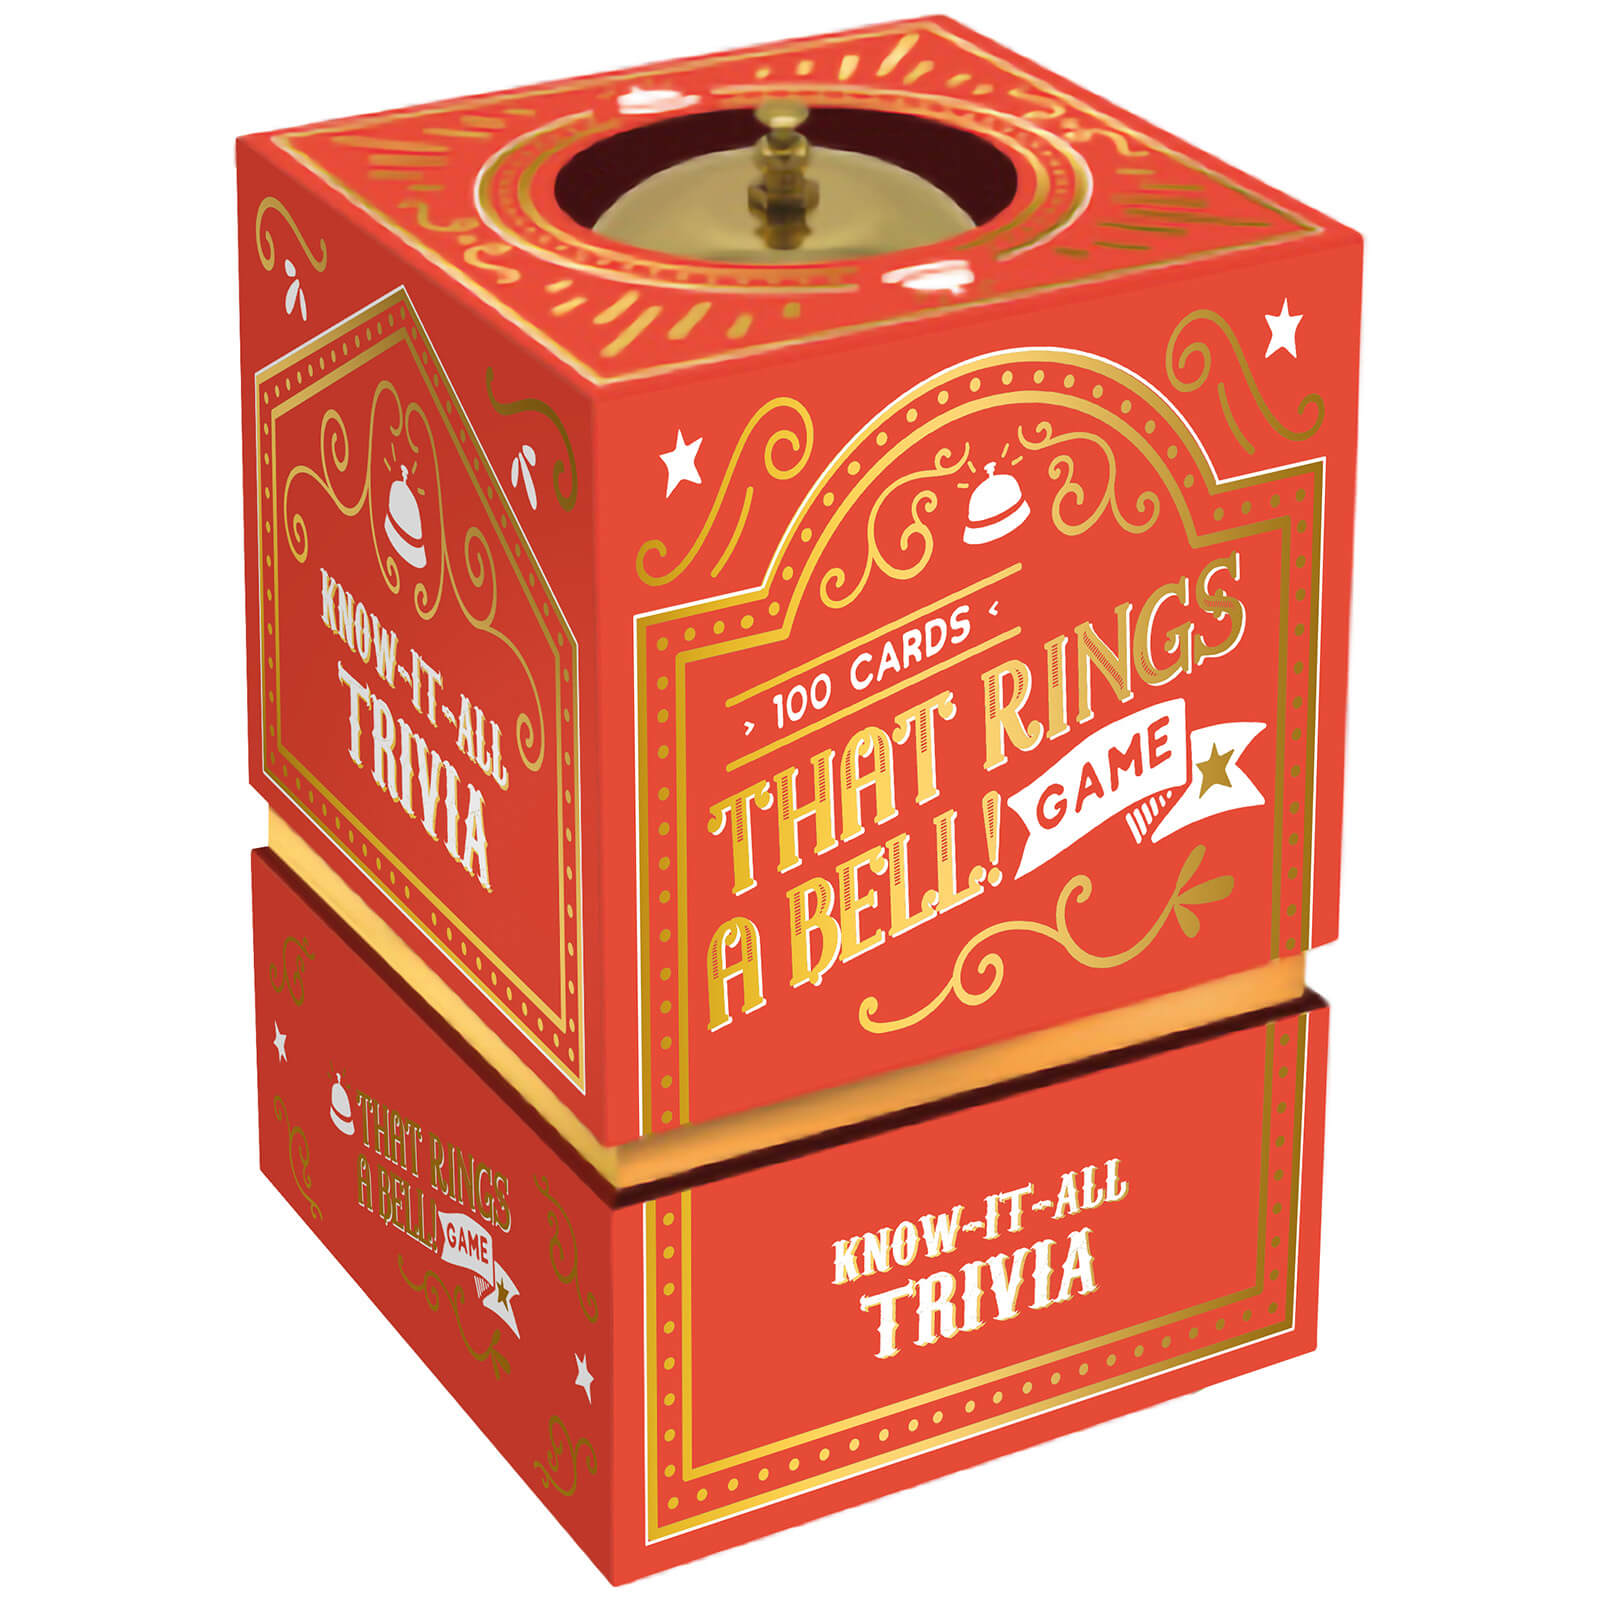 That Rings a Bell! Game: Know-It-All Trivia Game